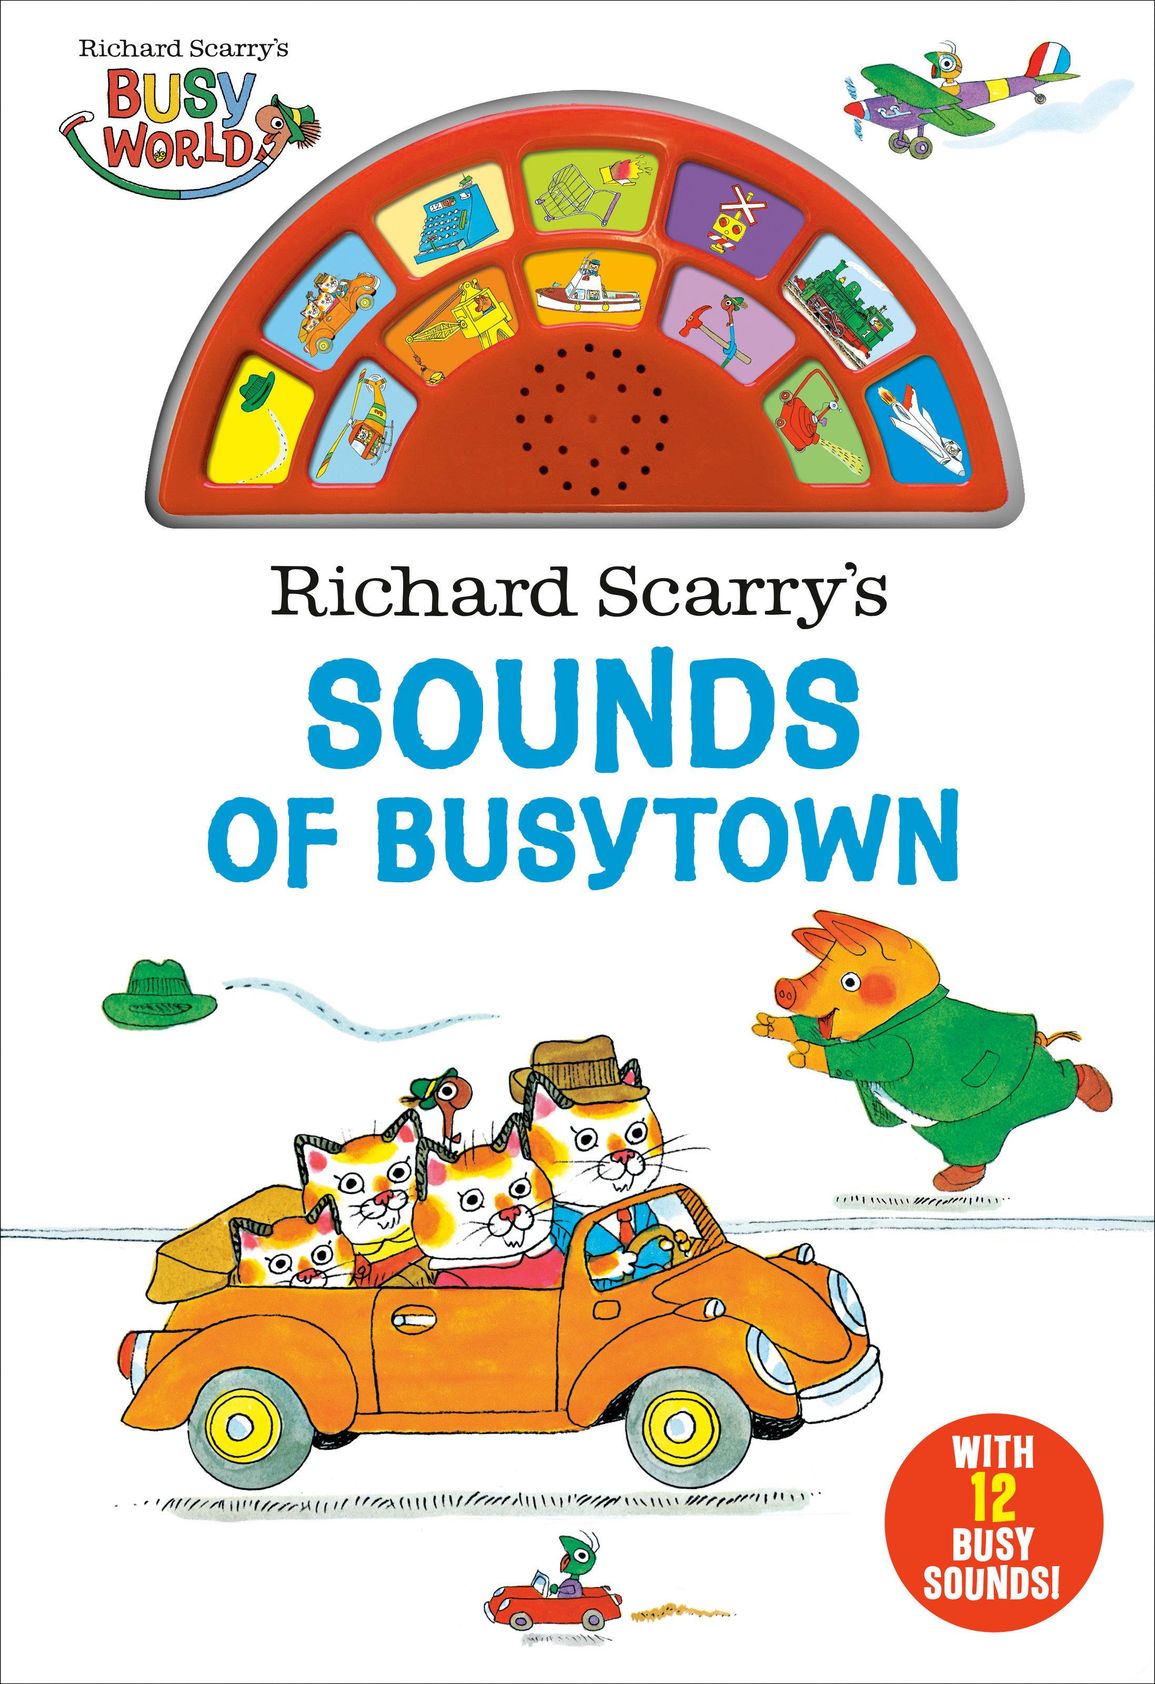 Richard Scarry: Richard Scarry's Sounds of Busytown